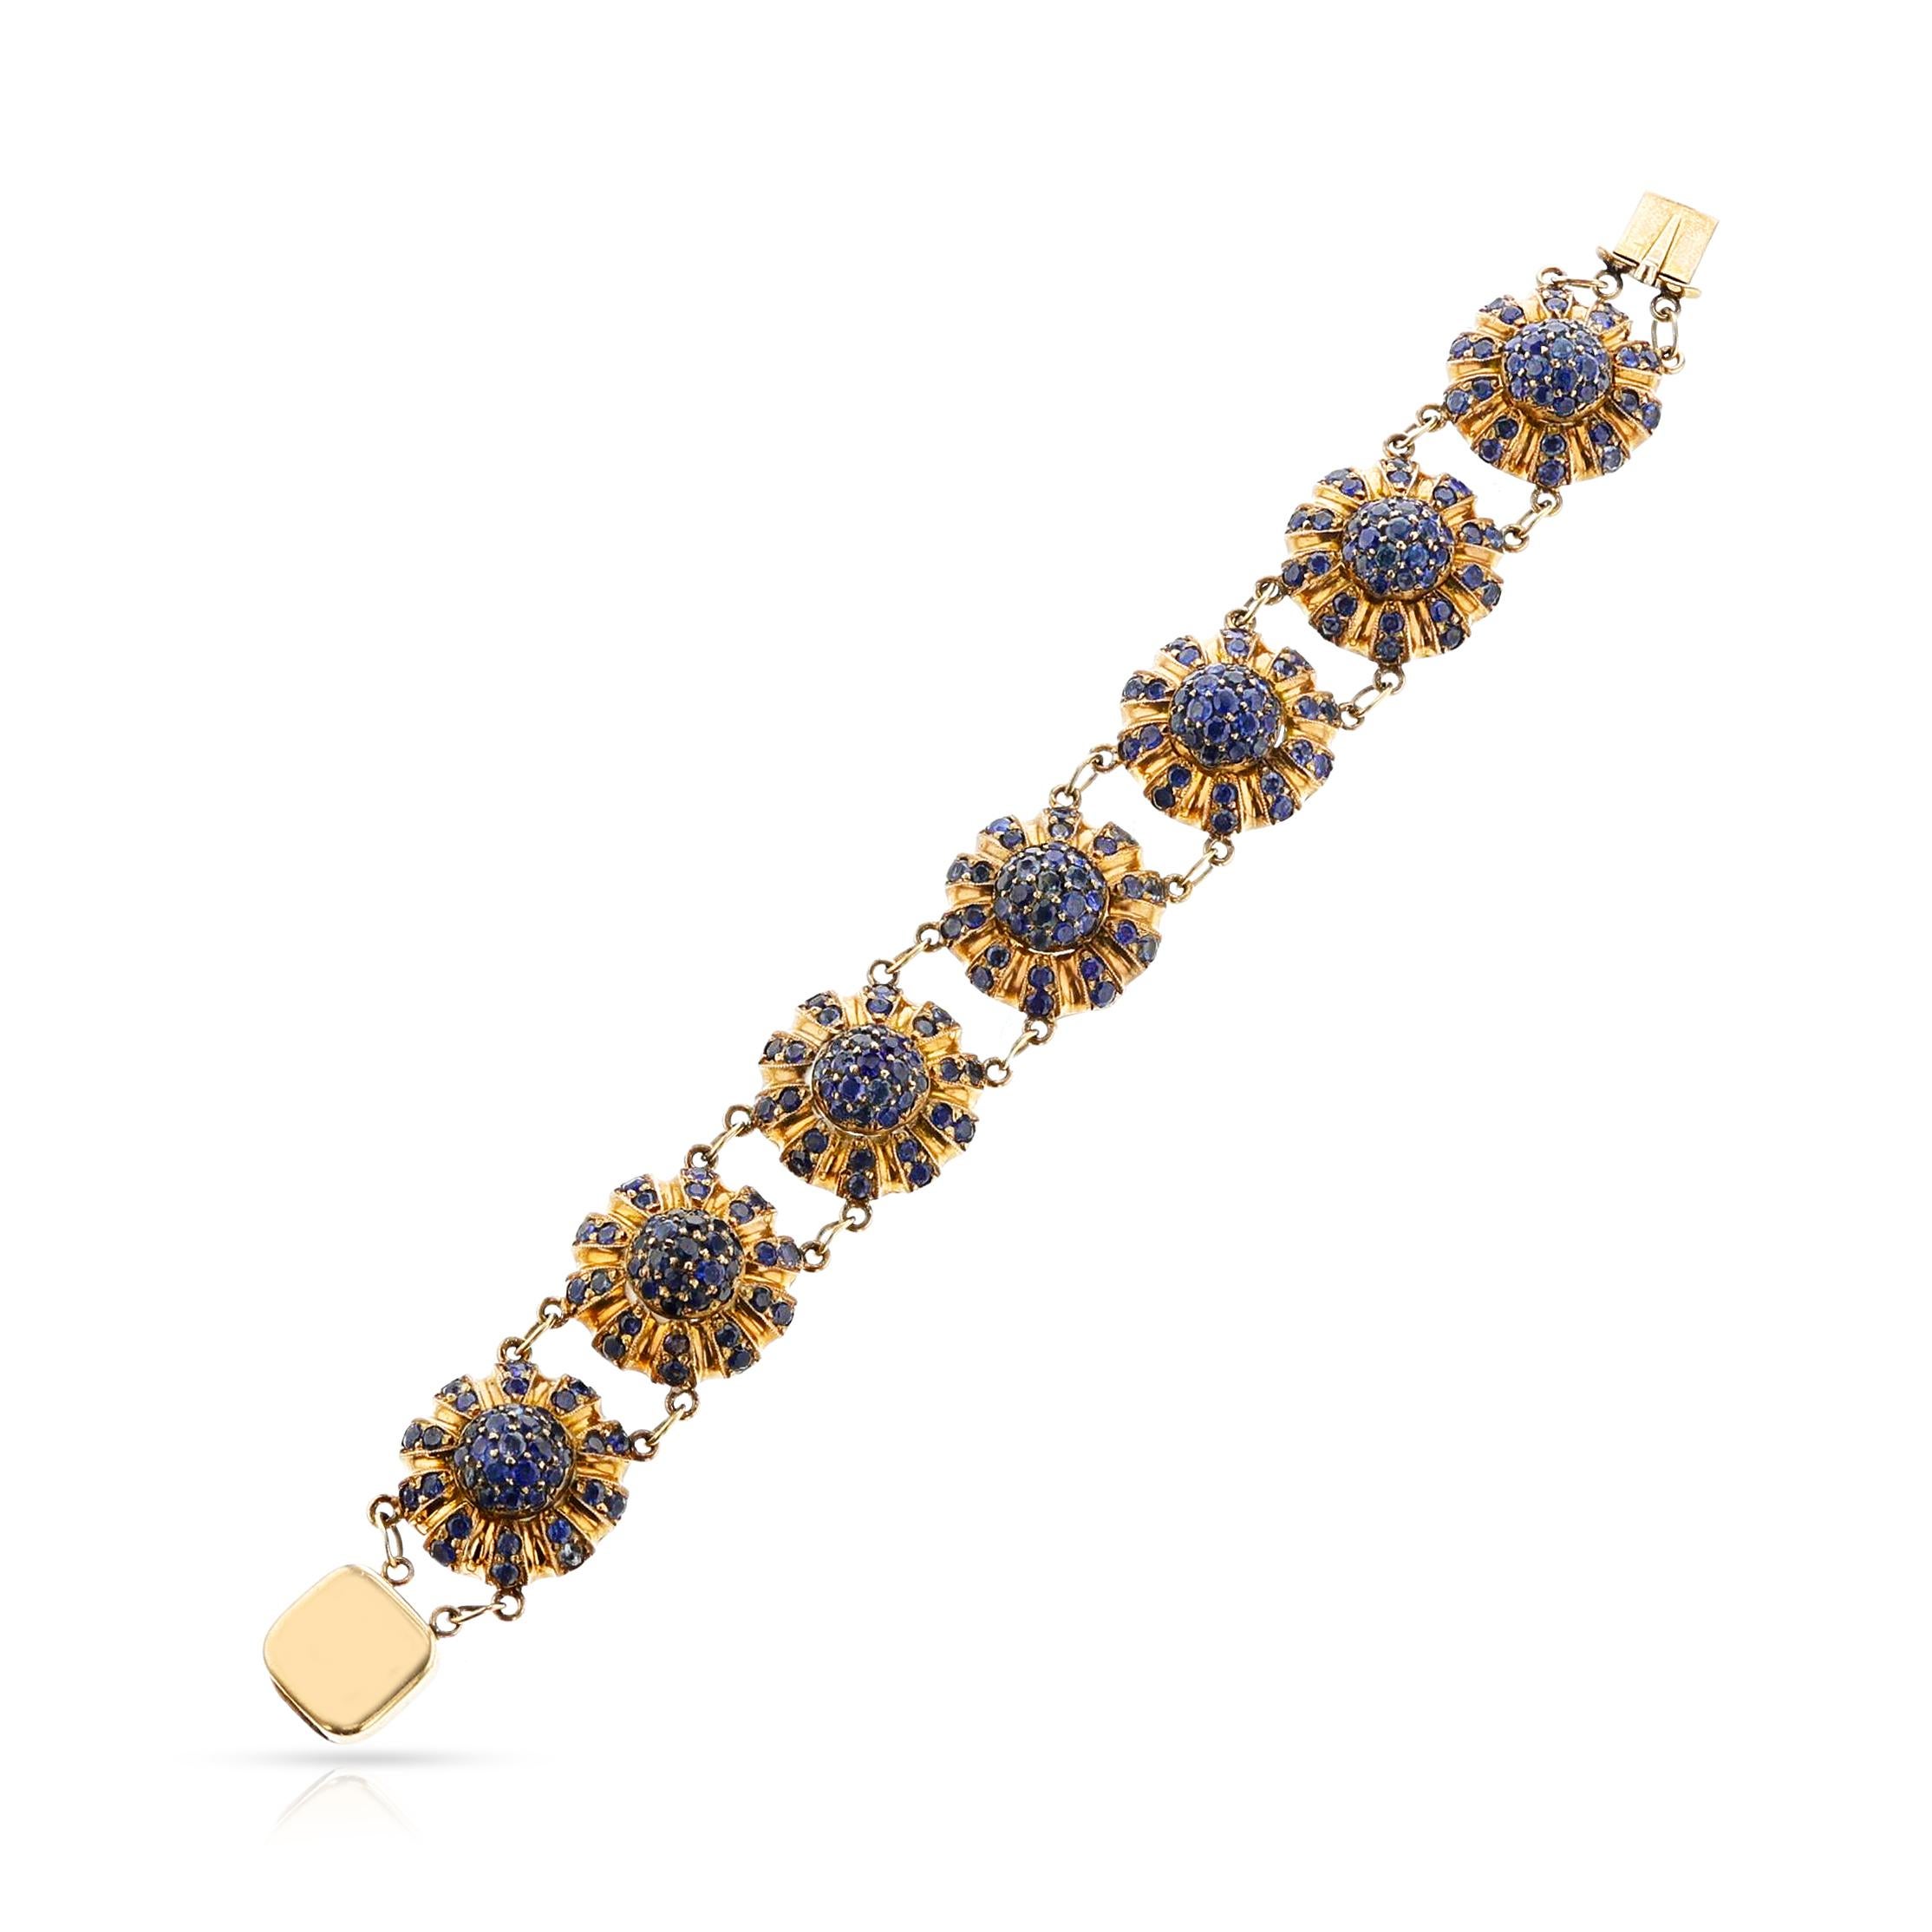 An Antique Sapphire Flower Bracelet made in 14k Yellow Gold. The total weight is 53.50 grams. The length is 6.75